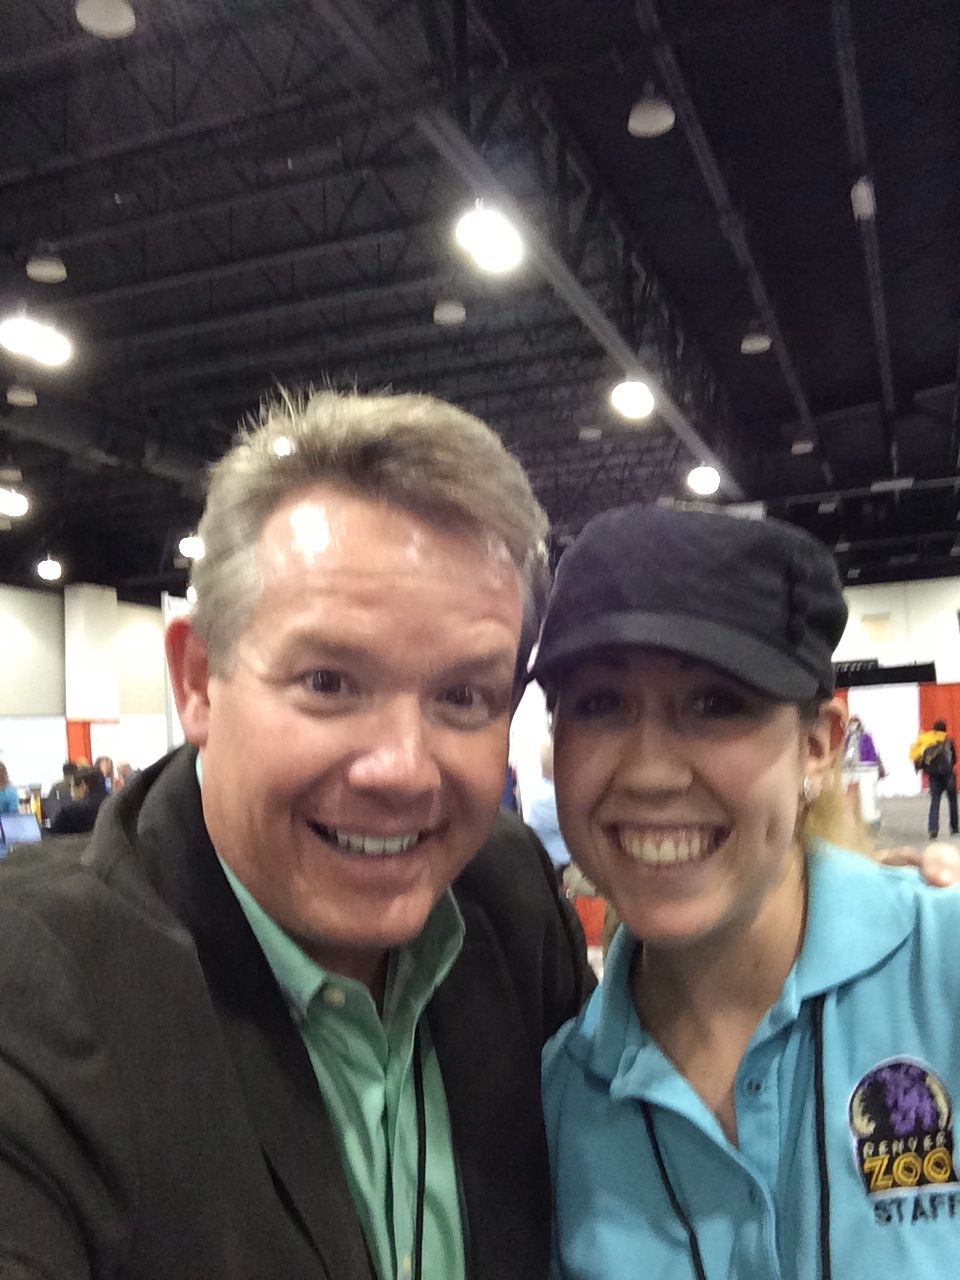 Share your #ScienceSelfie with us on Twitter. @SteveSpangler